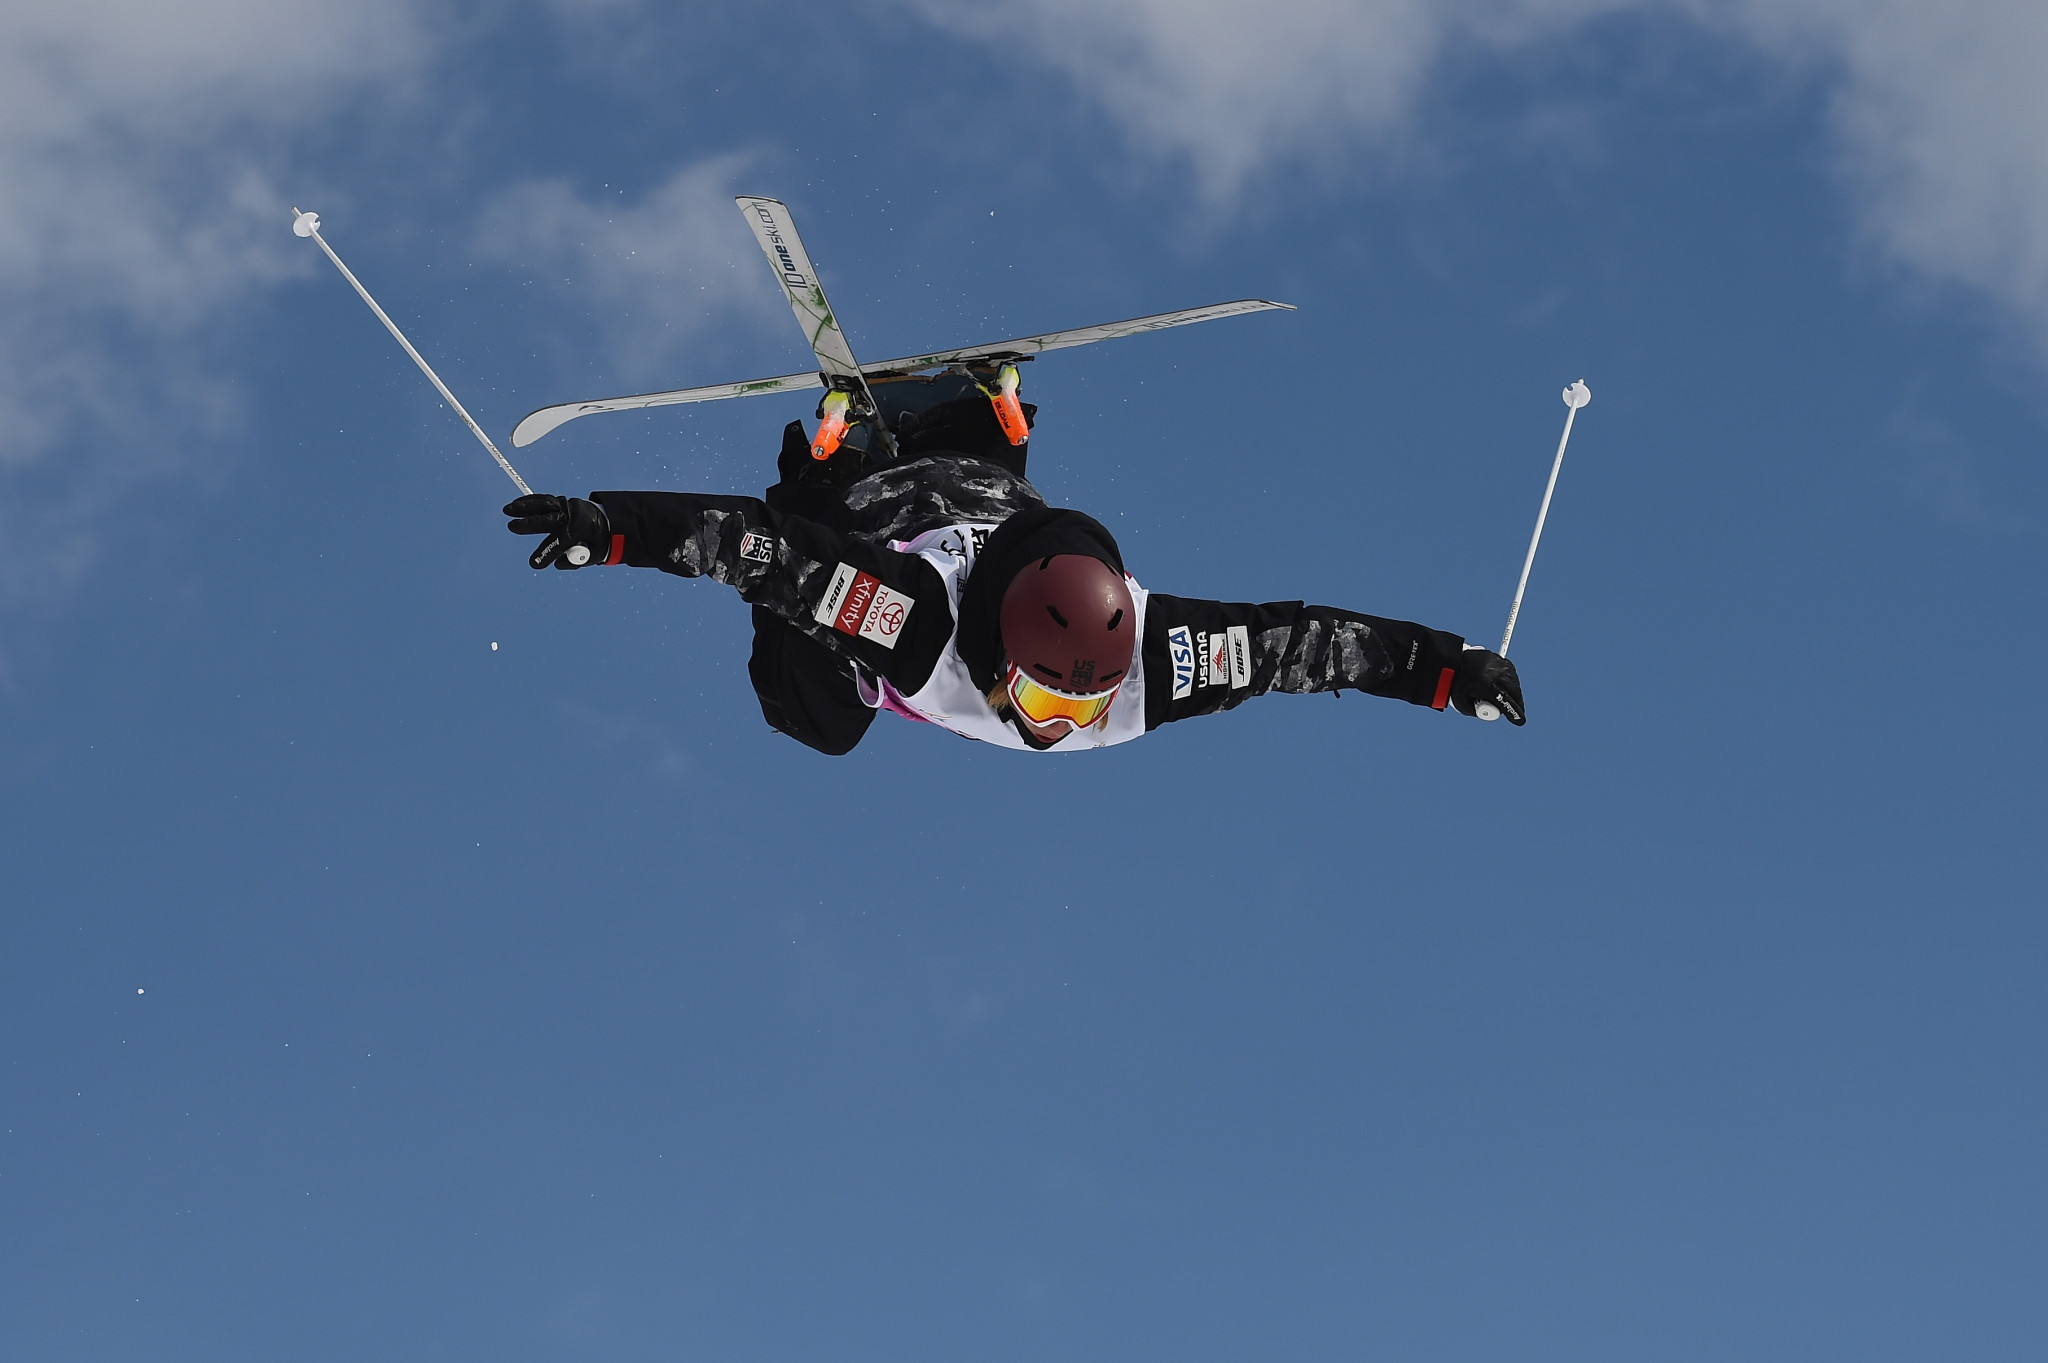 Jesse Andringa won both the men's moguls and double moguls at this year's event ©Getty Images